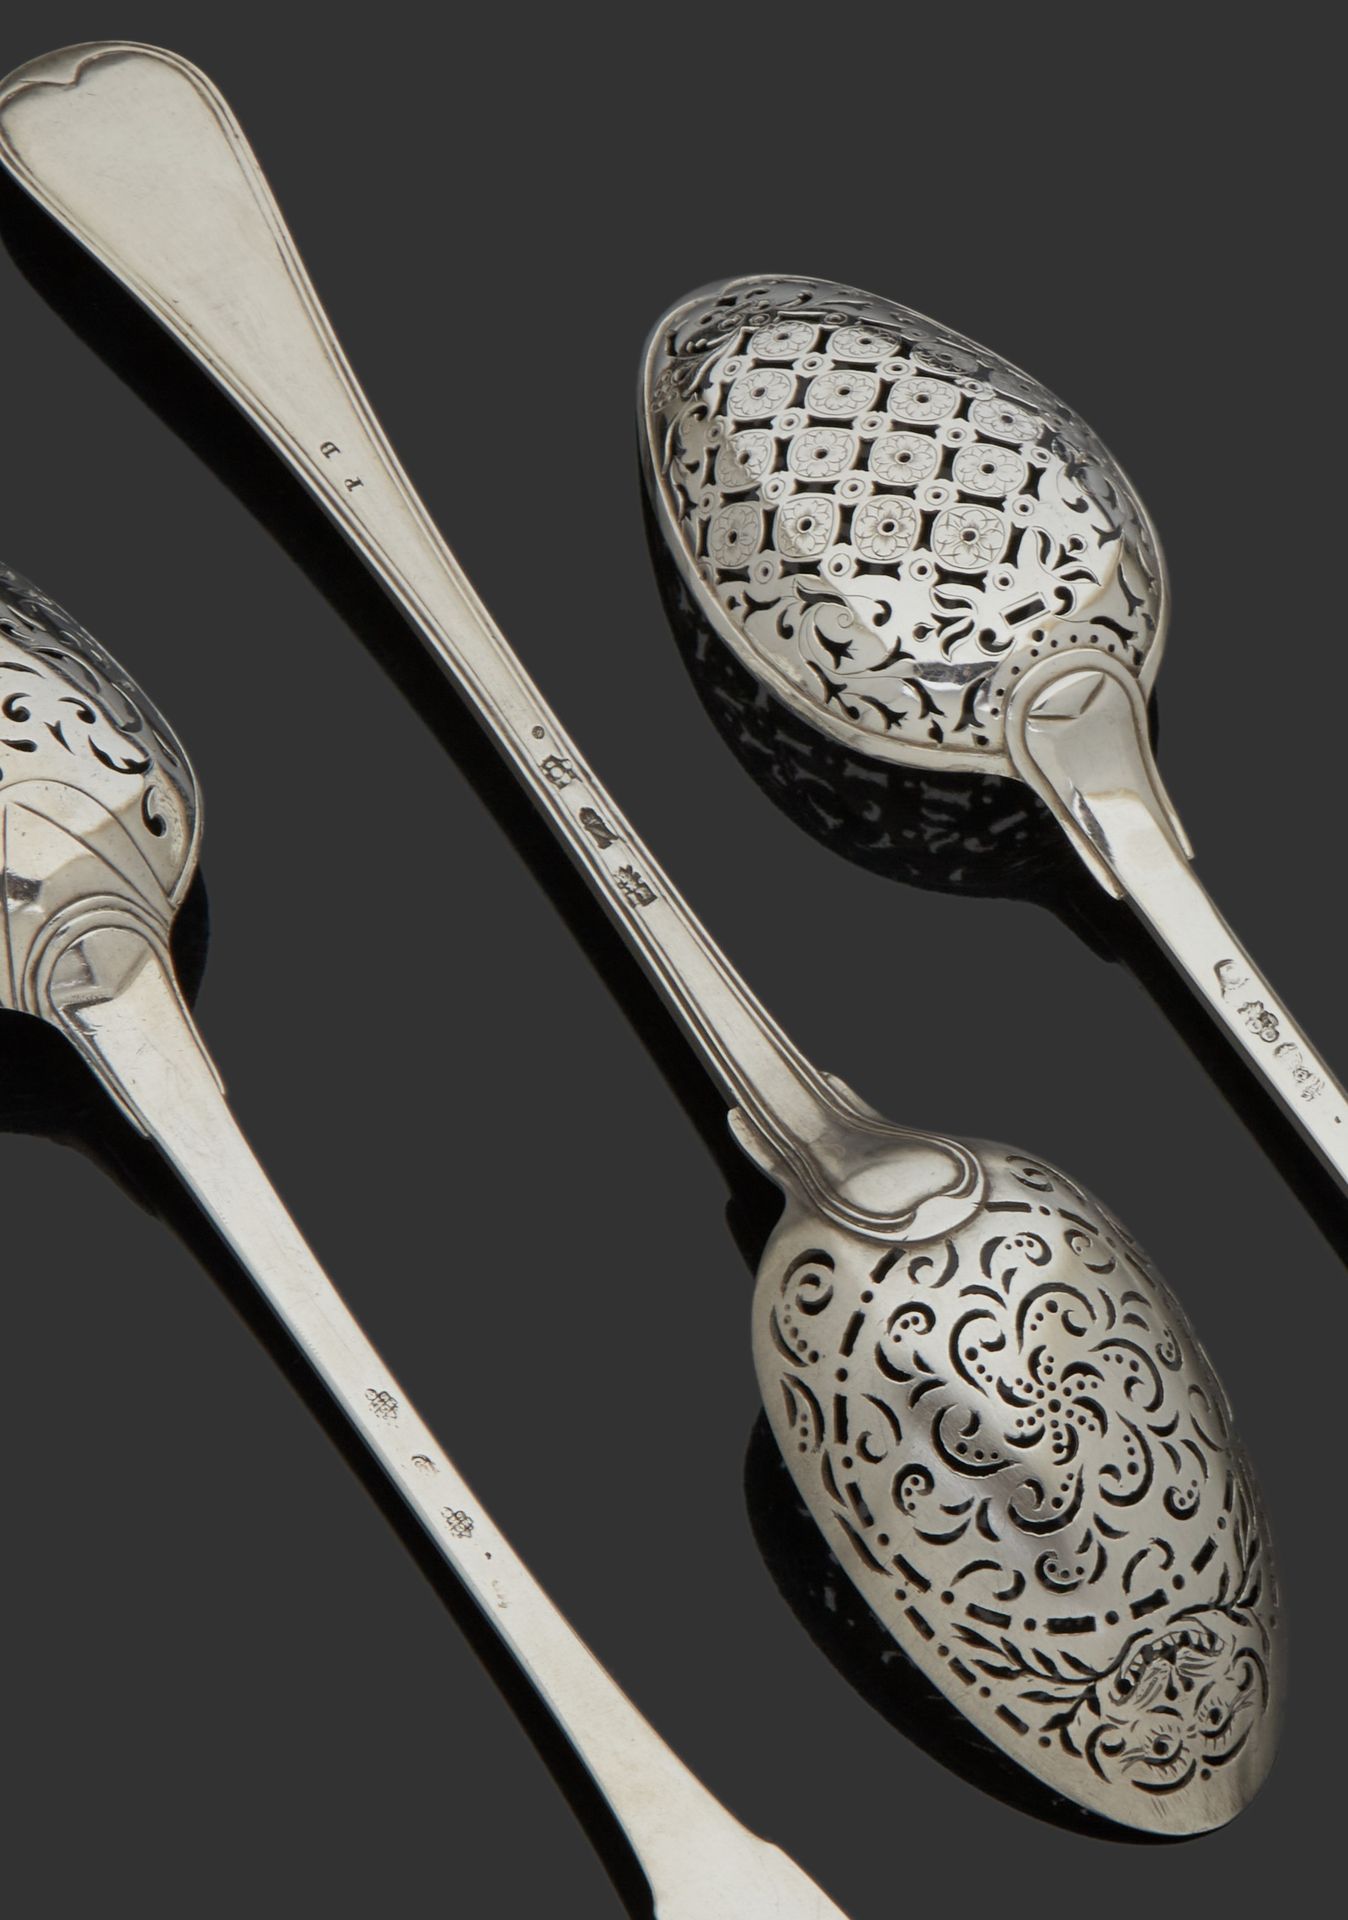 Null MONTPELLIER CRAFT 1781 - 1783
Silver olive spoon, drop of water model, bord&hellip;